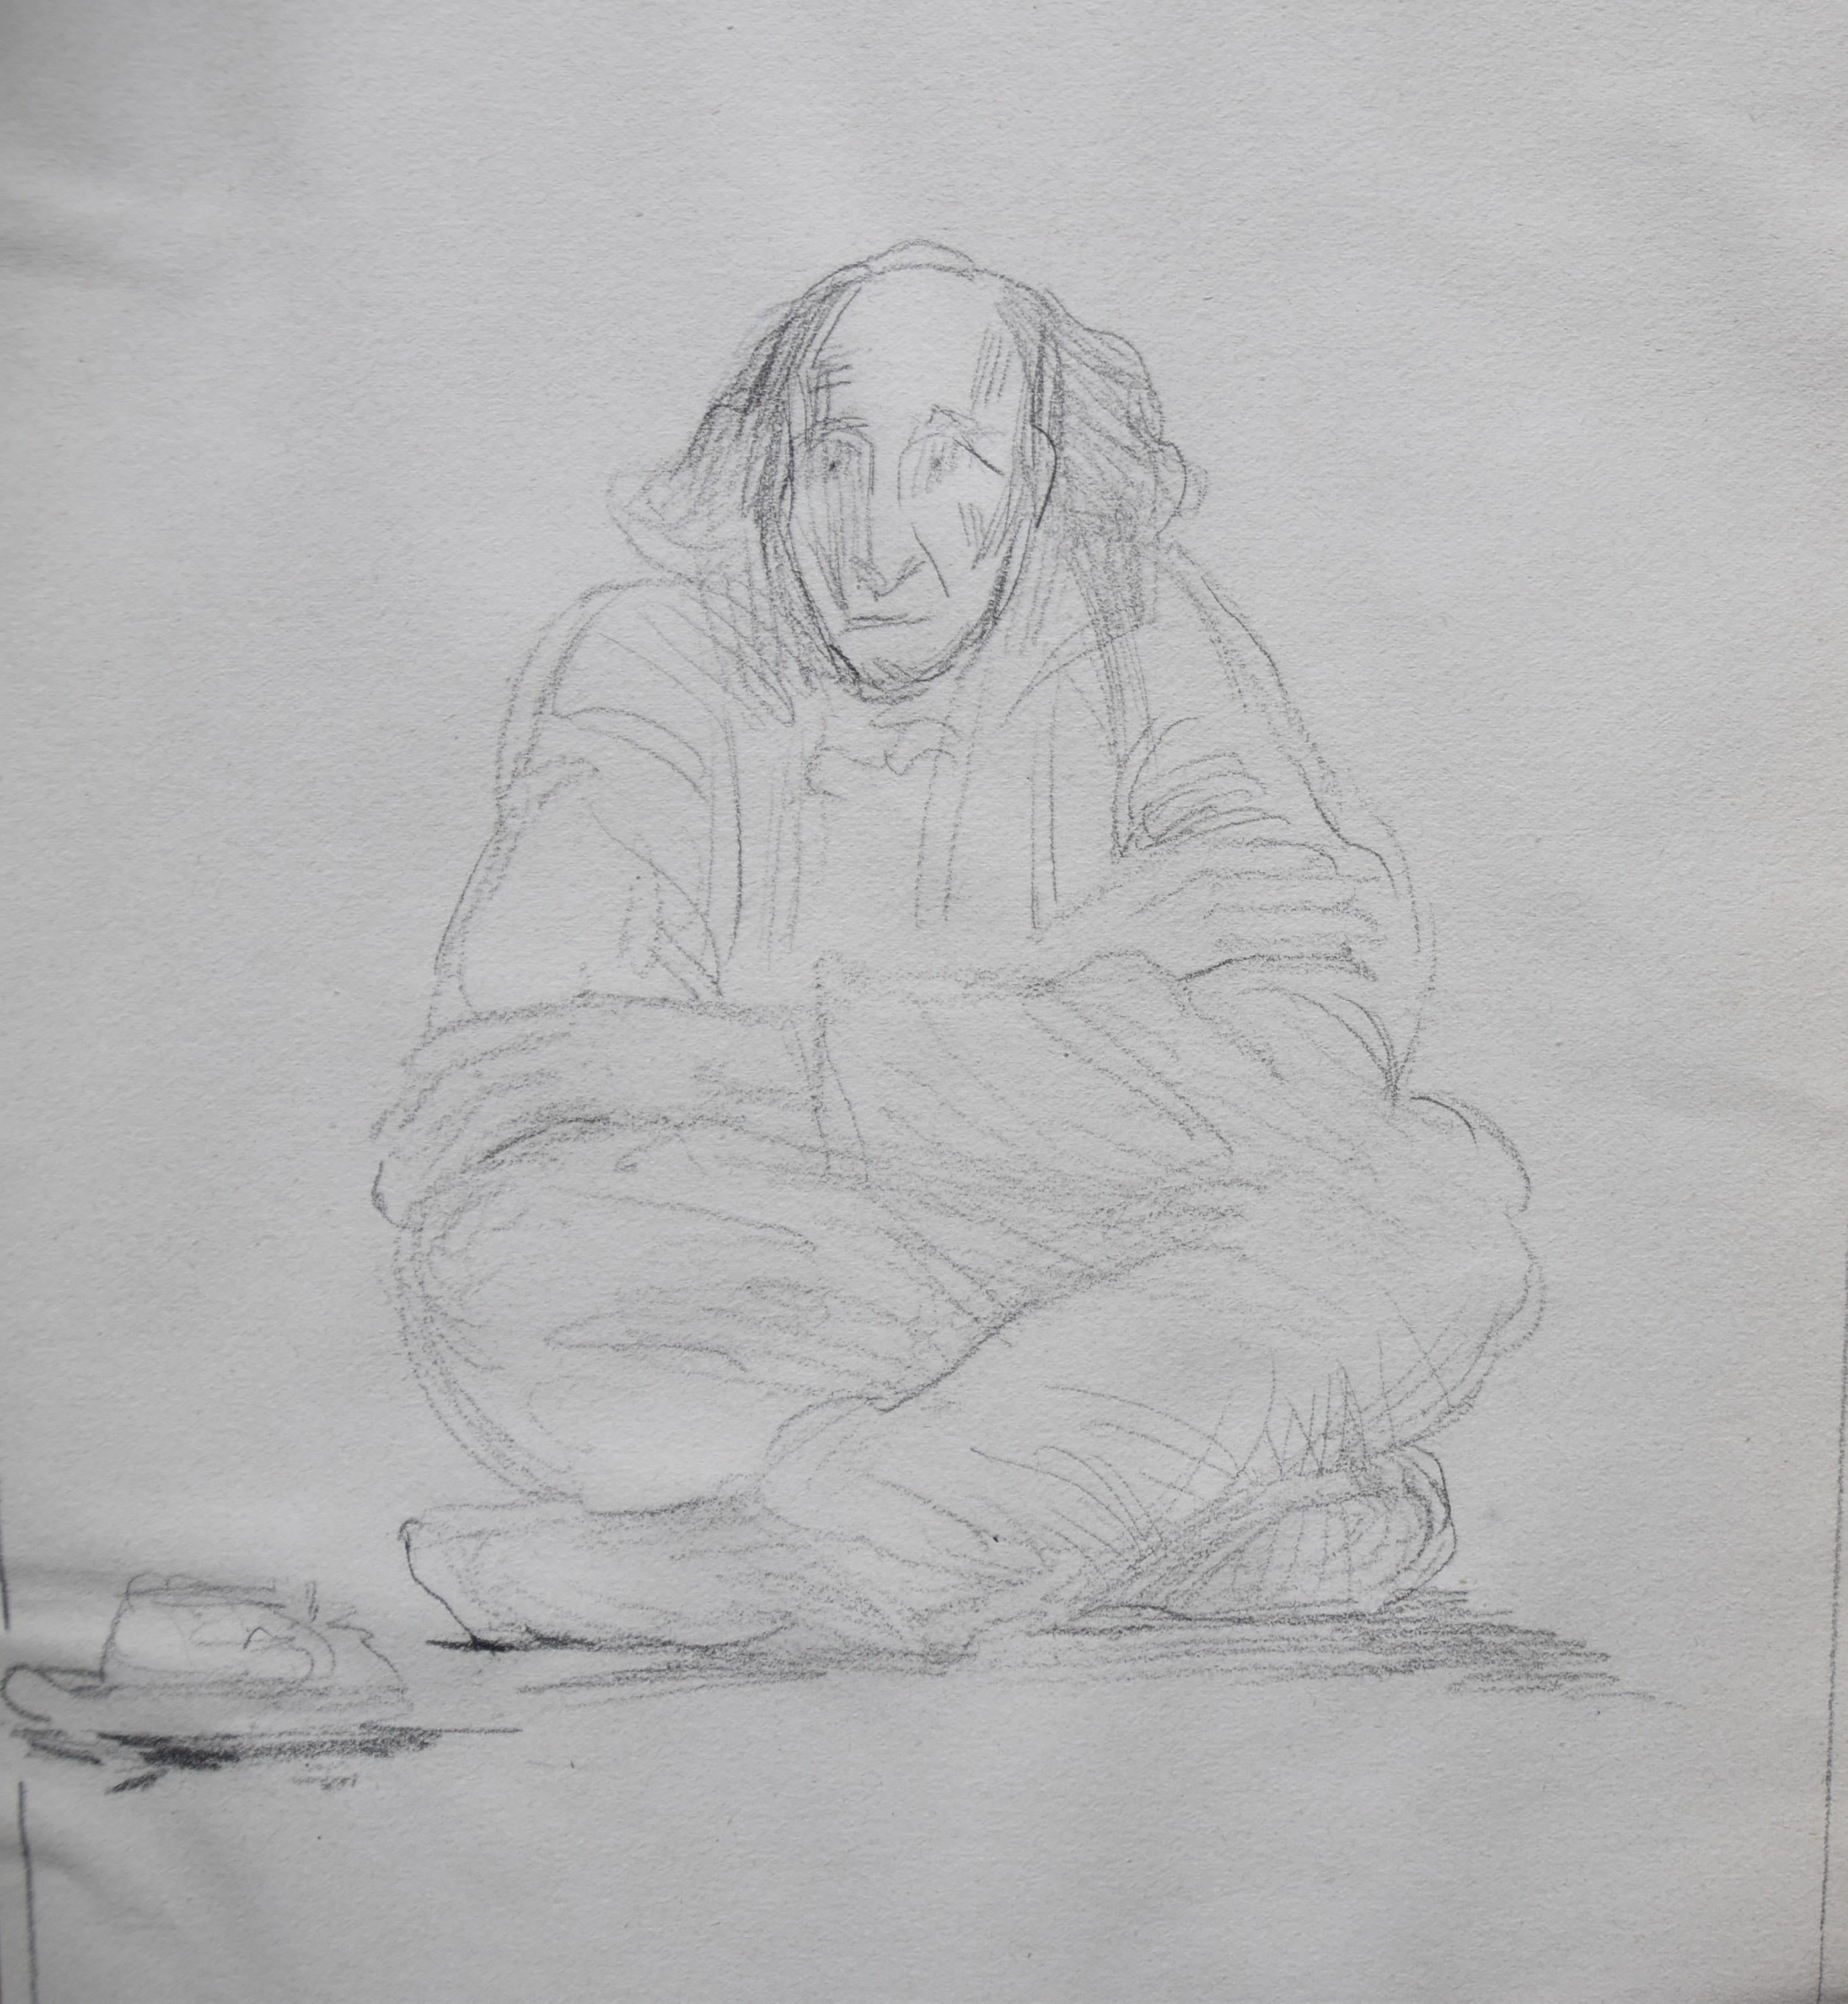 Jean-Pierre Laurens (1875-1932) 
Study of a sitting beggar,
Pencil on paper
25.5 x 20.5 cm
Stamp of the Jean-Pierre Laurens Estate on the lower right
In quite good condition : glued on the four corners, the sheet is undulating as visible on the